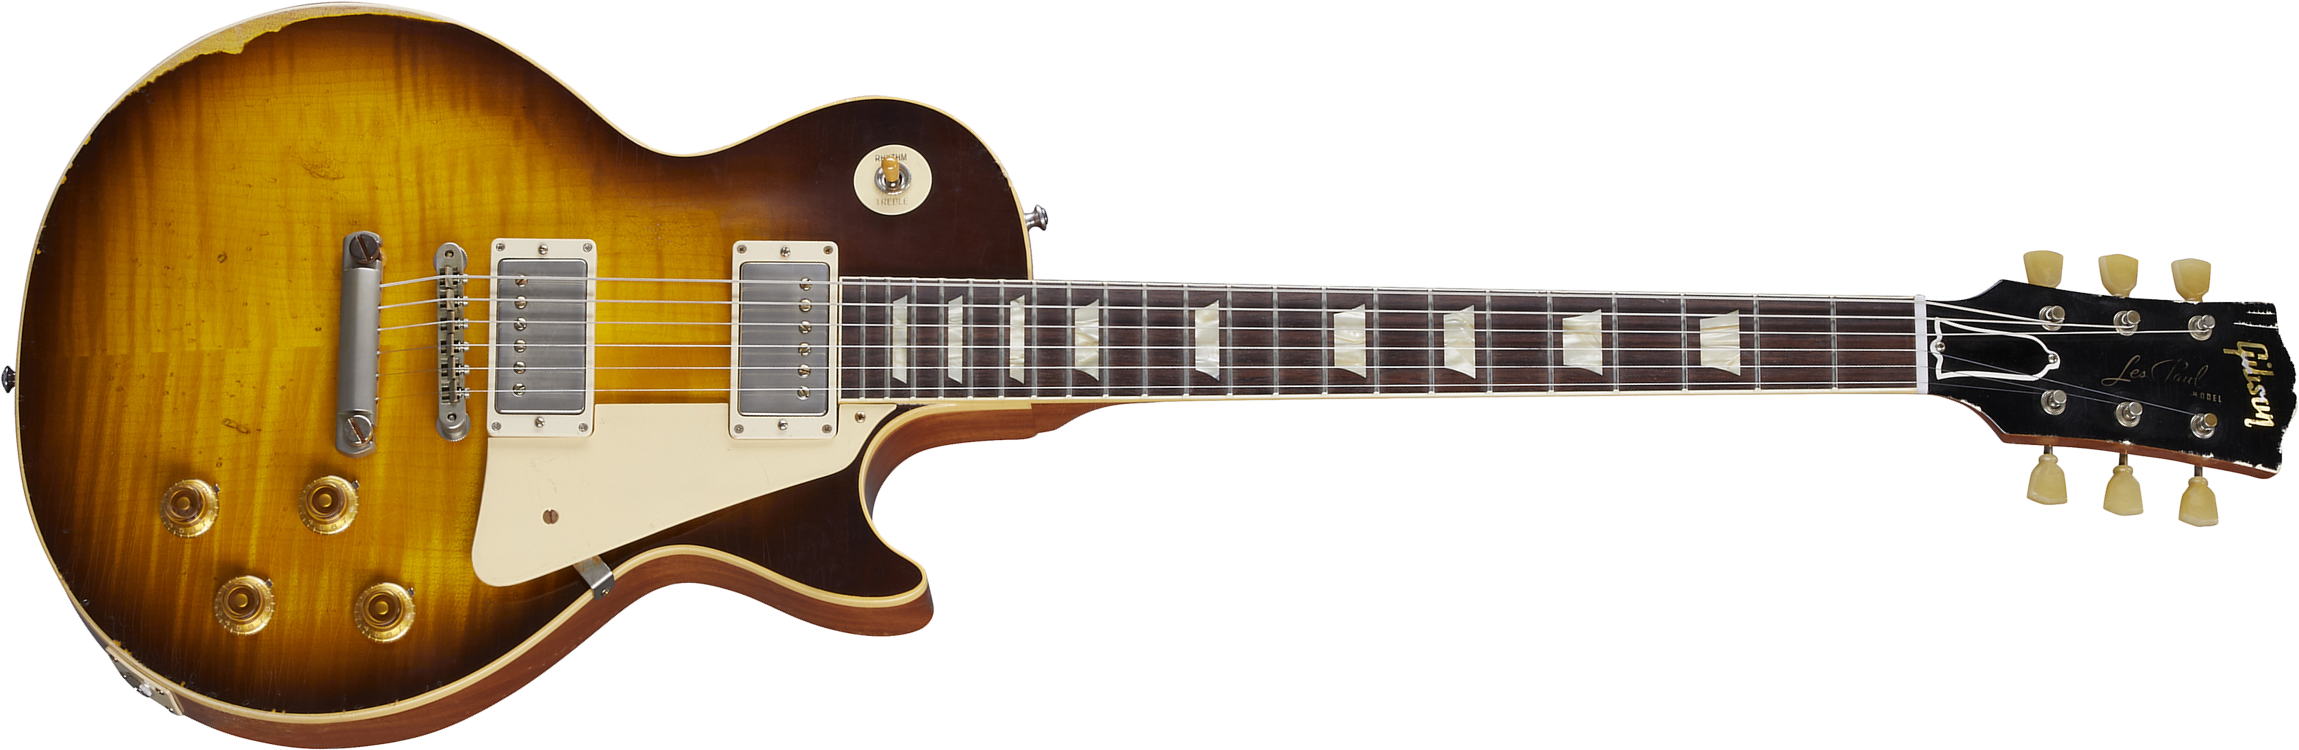 Gibson Custom Shop Murphy Lab Les Paul Standard 1959 Reissue 2h Ht Rw - Ultra Heavy Aged Kindred Burst - Single cut electric guitar - Main picture